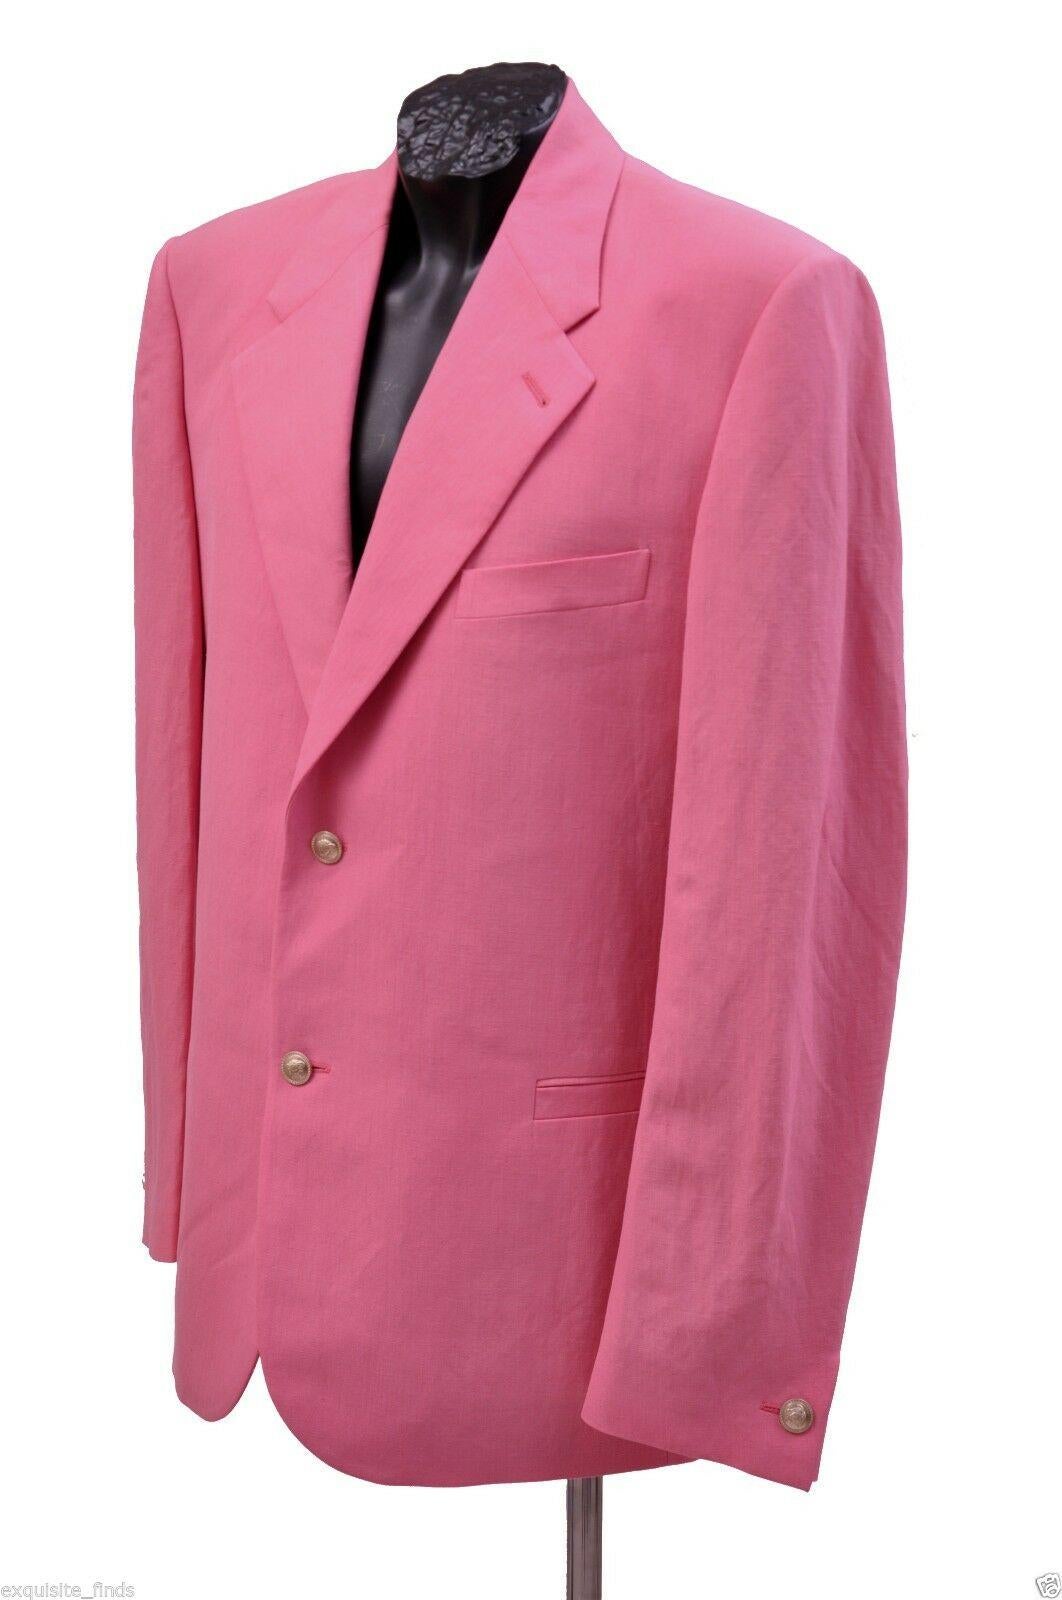 VERSACE  MEN'S SUIT

49% wool, 51% linen

The jacket features: single-breasted Italian design, two side pockets, one chest pocket, four button sleeves,  back vent and 3 inner finished pockets.  
Signature lining
Color: Pink
 
Iconic Medusa